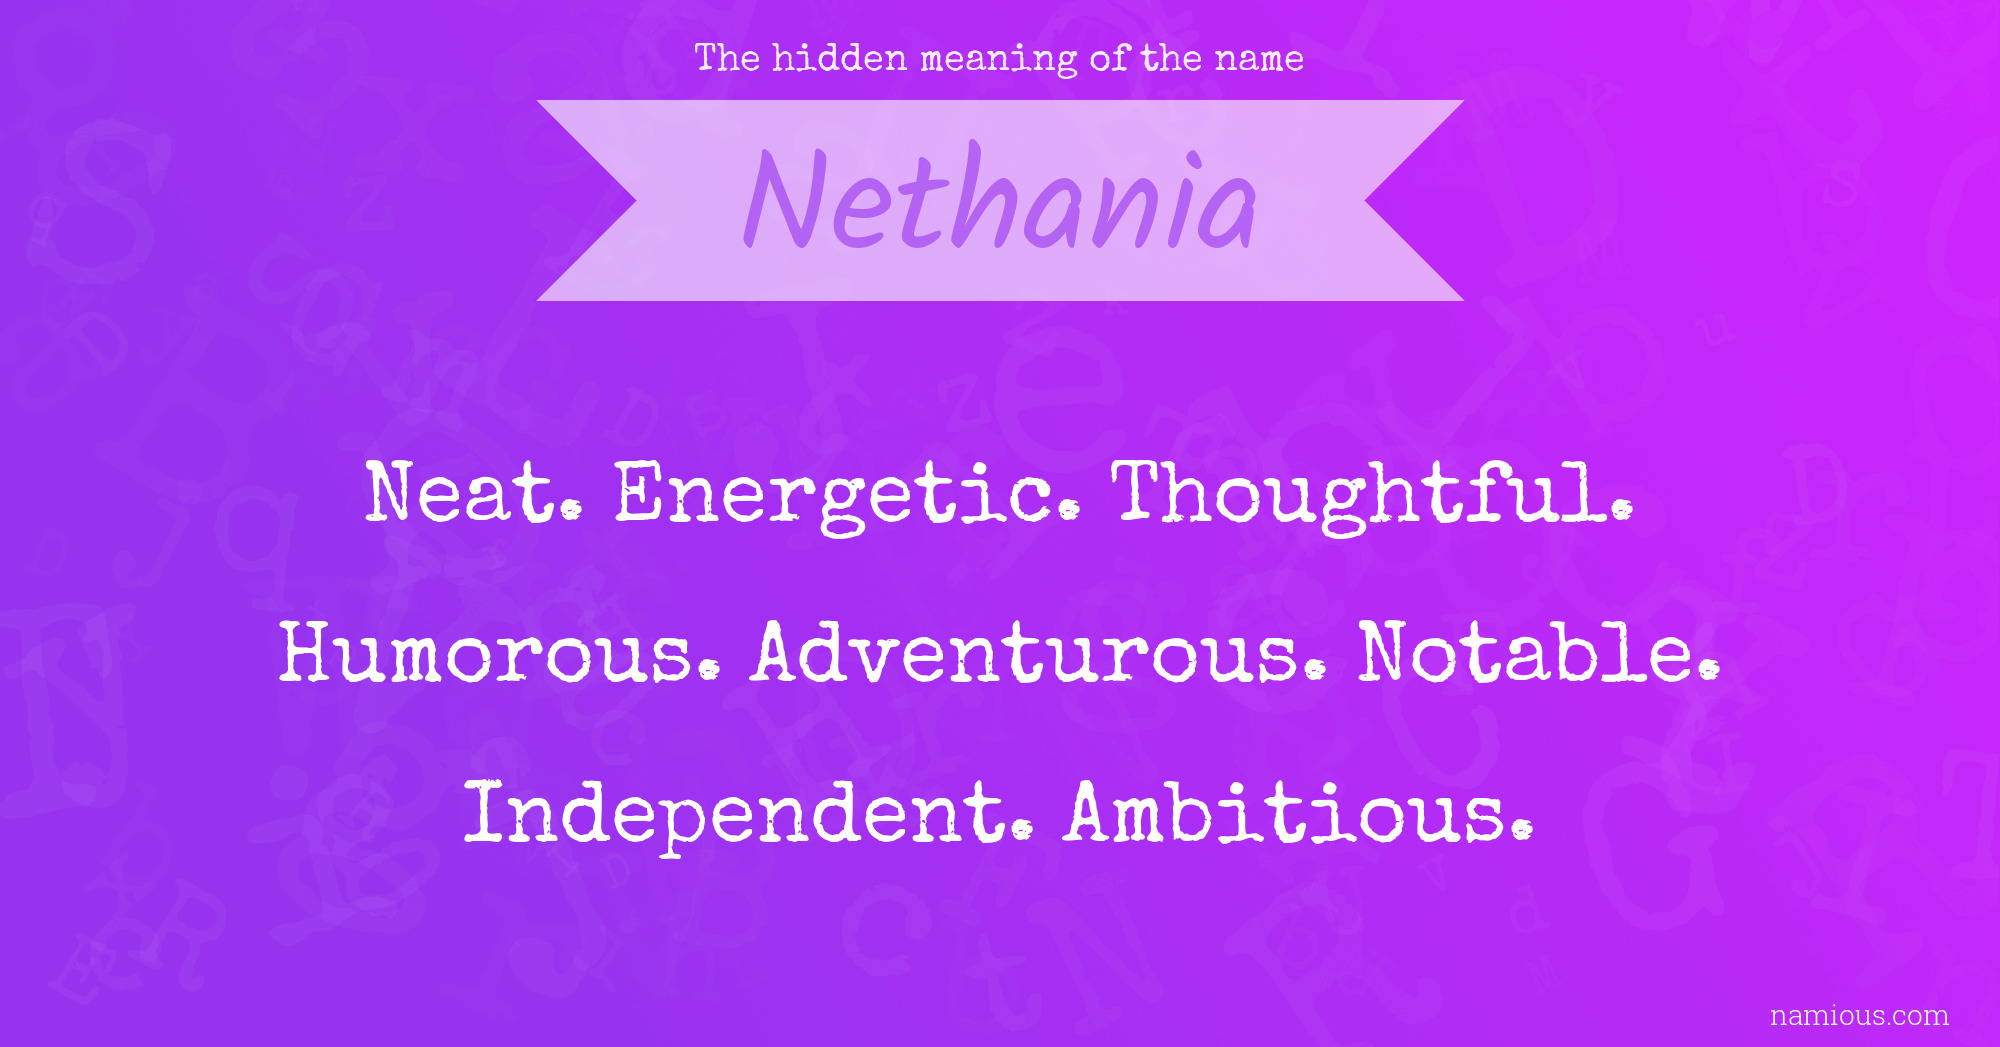 The hidden meaning of the name Nethania